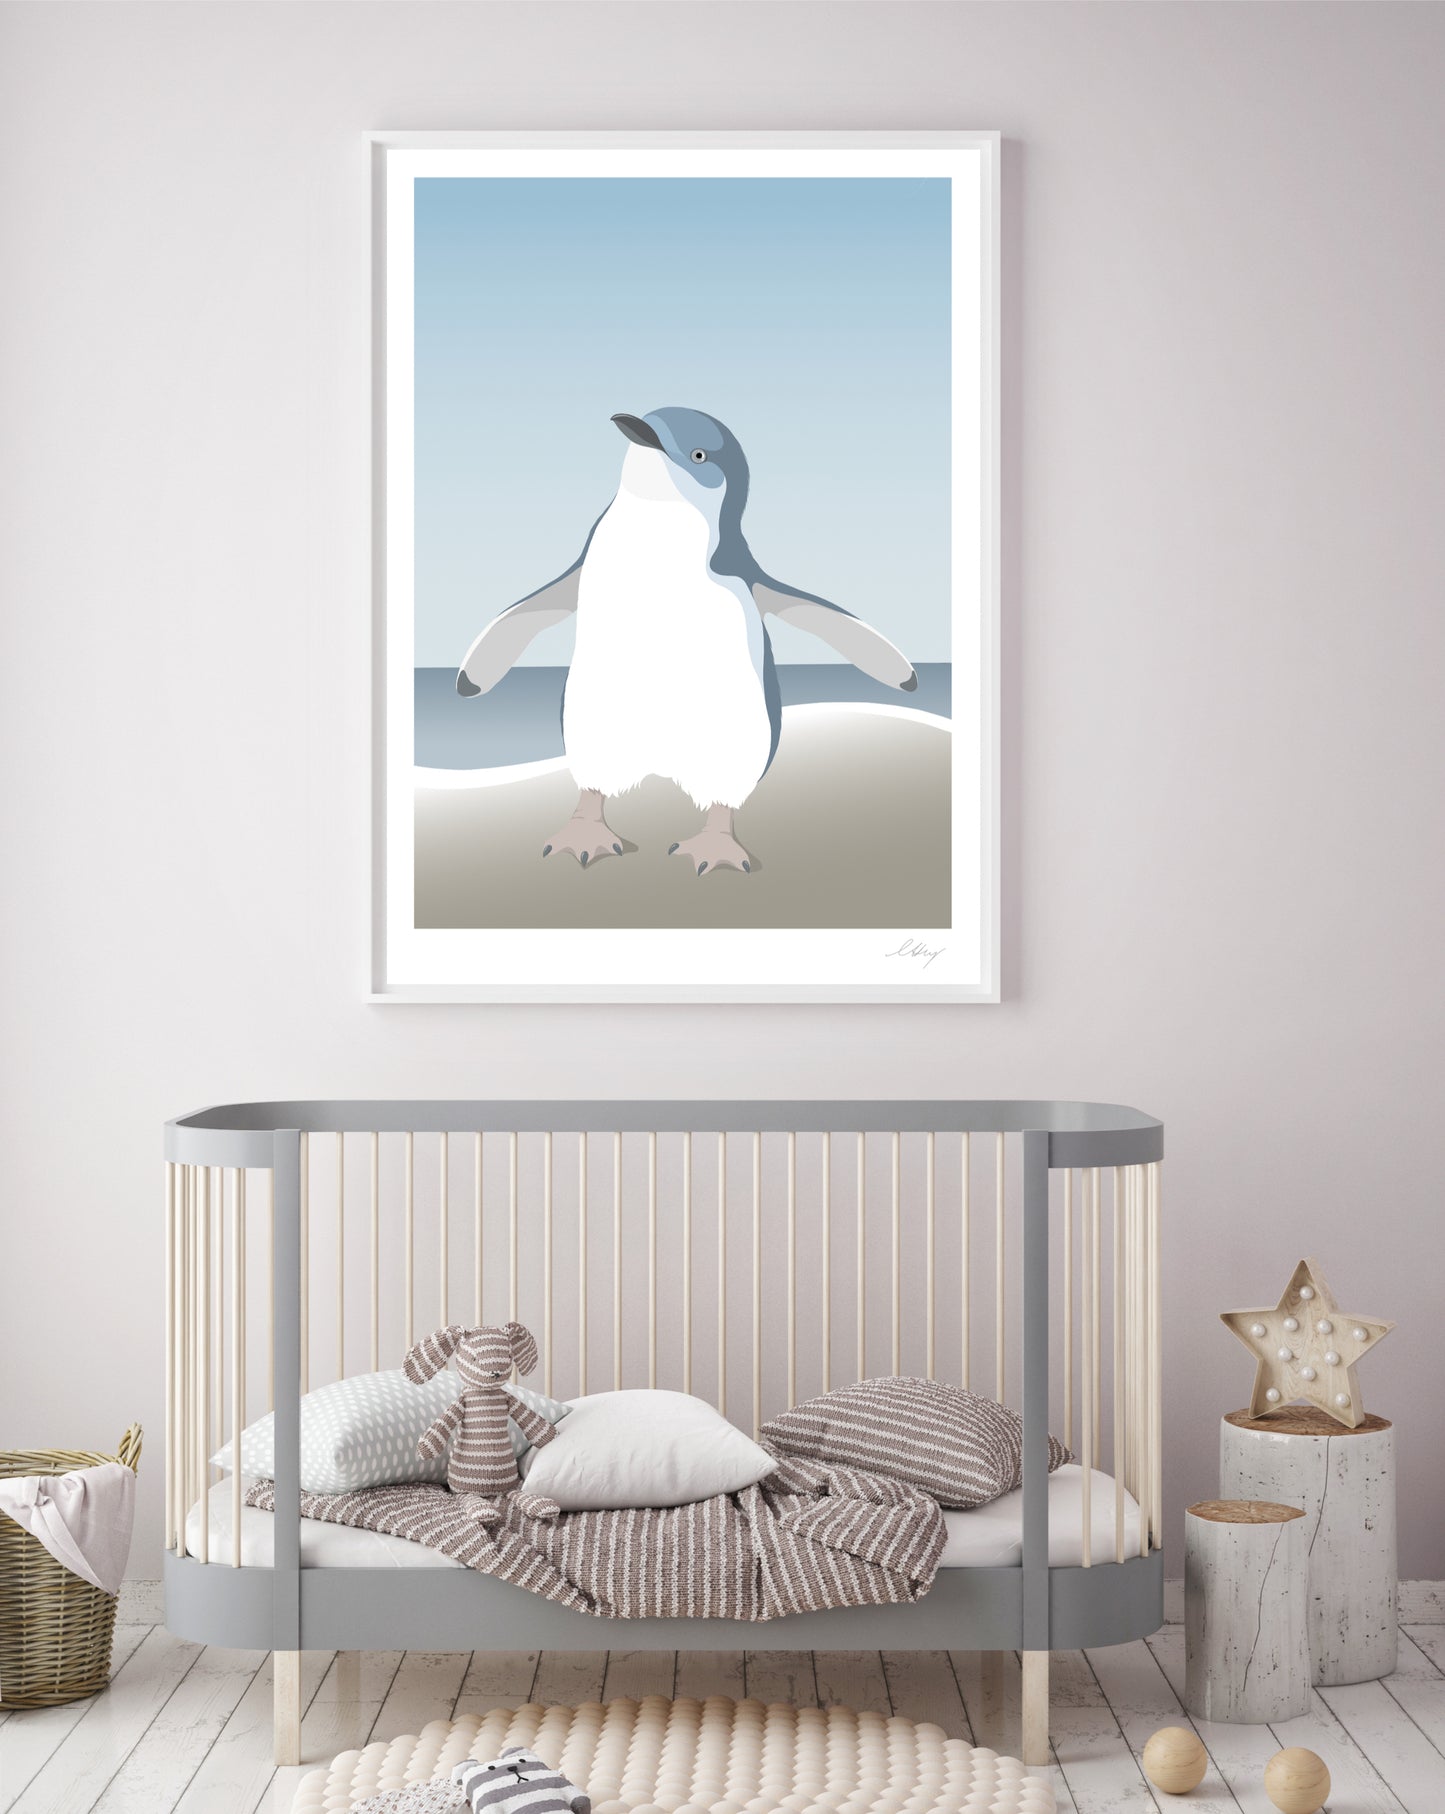 Framed art print of the Blue Penguin or Fairy Penguin for a baby nursery, by New Zealand artist Hansby Design